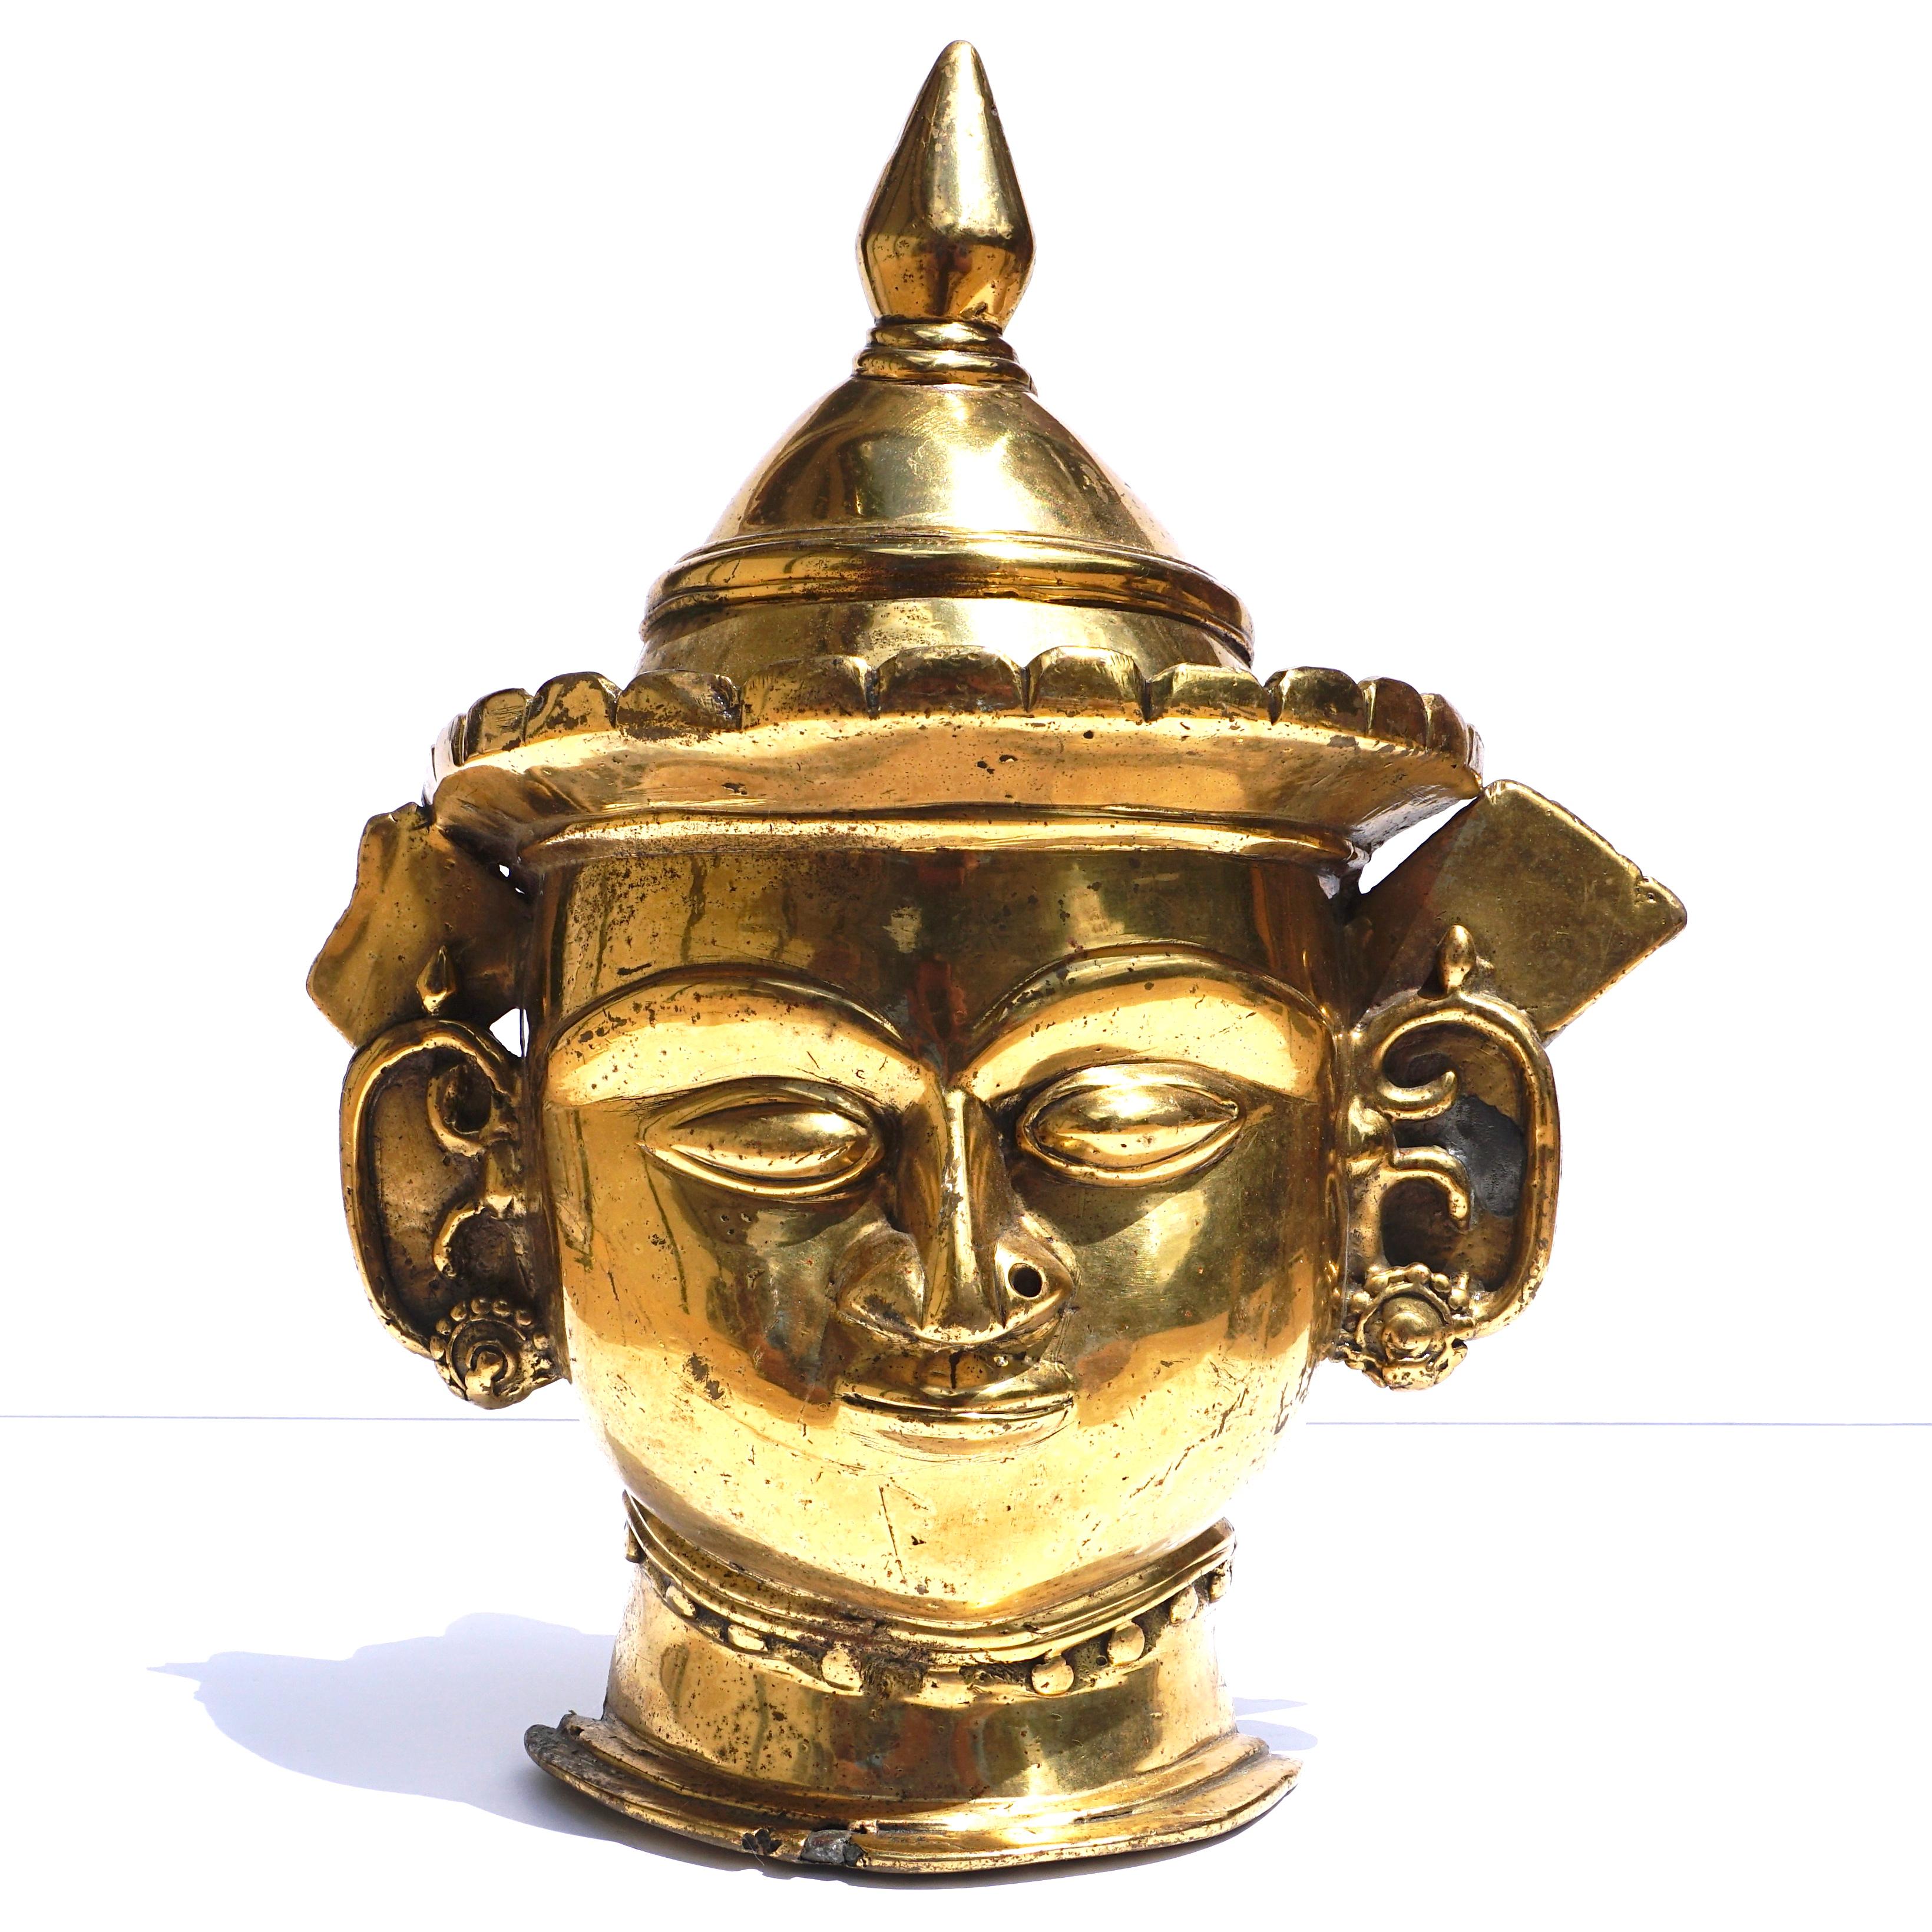 A Indian Mukhalingam Mukha face Lingum mask. A decorative gilt bronze Shiva facial representation of a Hindu God for phalic Lingums. A rare ritual artistic artifact. 

Dimensions: 12 x 10 x 3.5 inches

Condition: Very good with wear and restorations